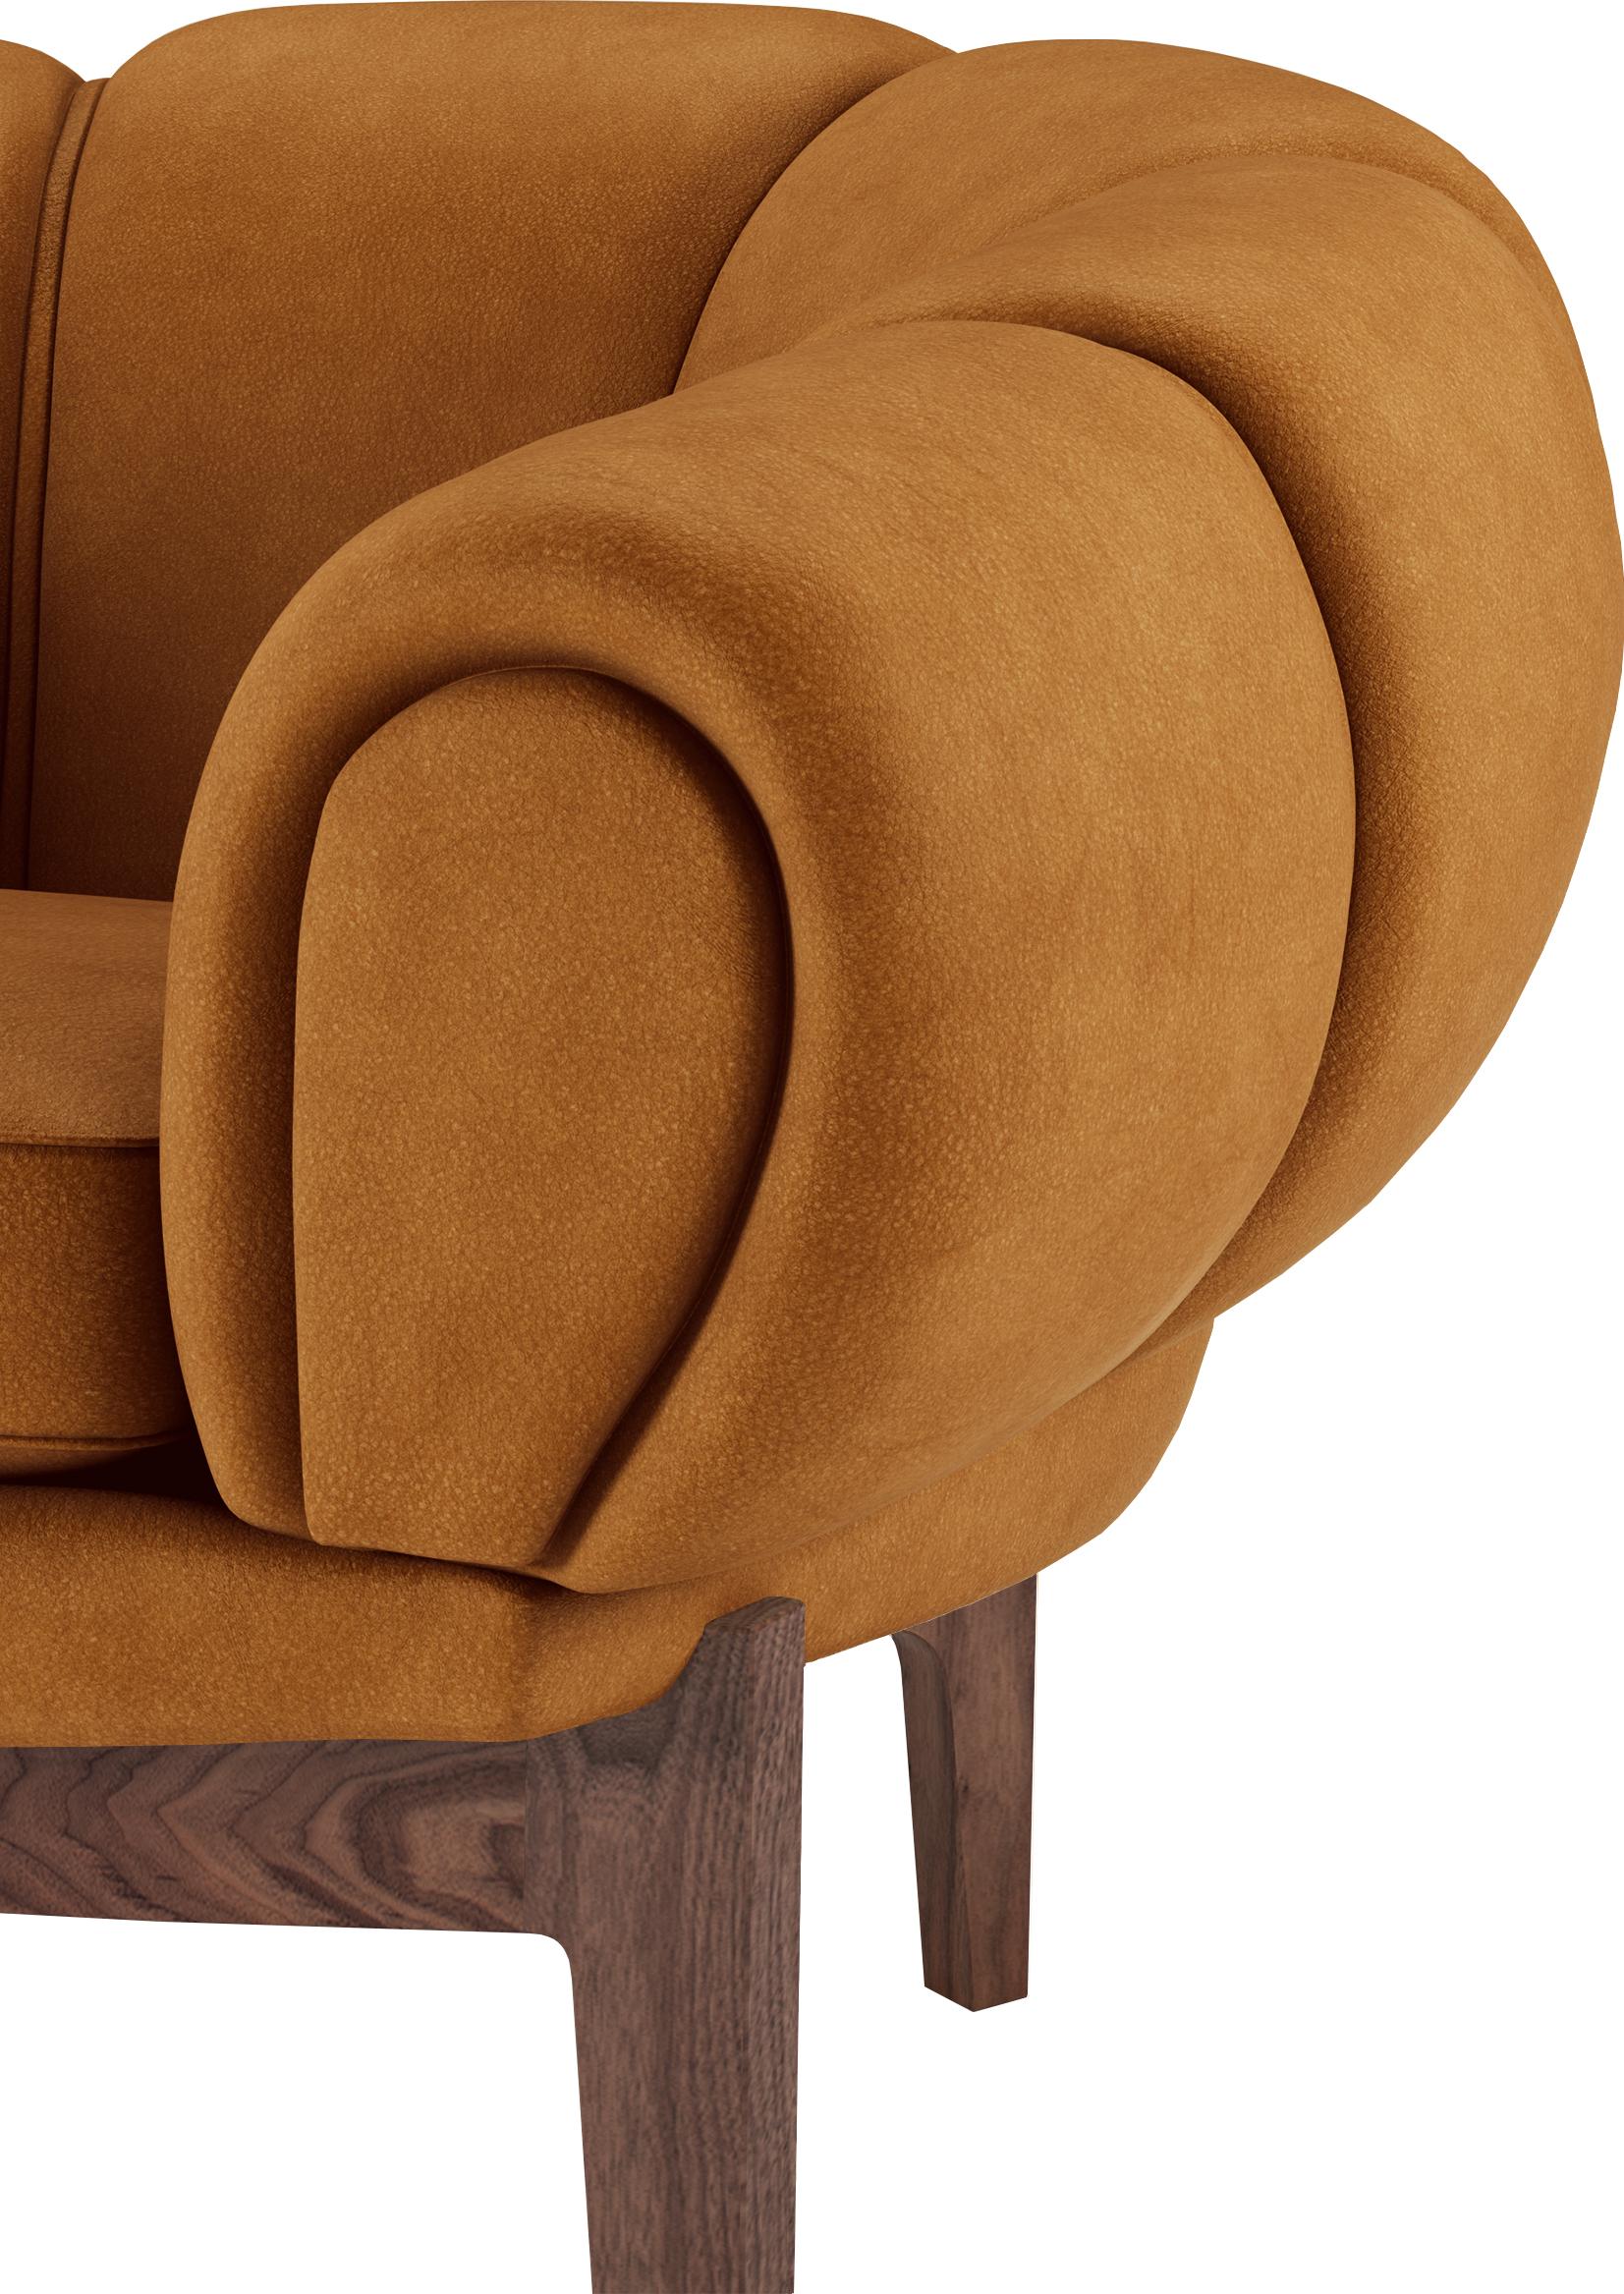 Leather 'Croissant' Lounge Chair by Illum Wikkelsø for Gubi For Sale 6